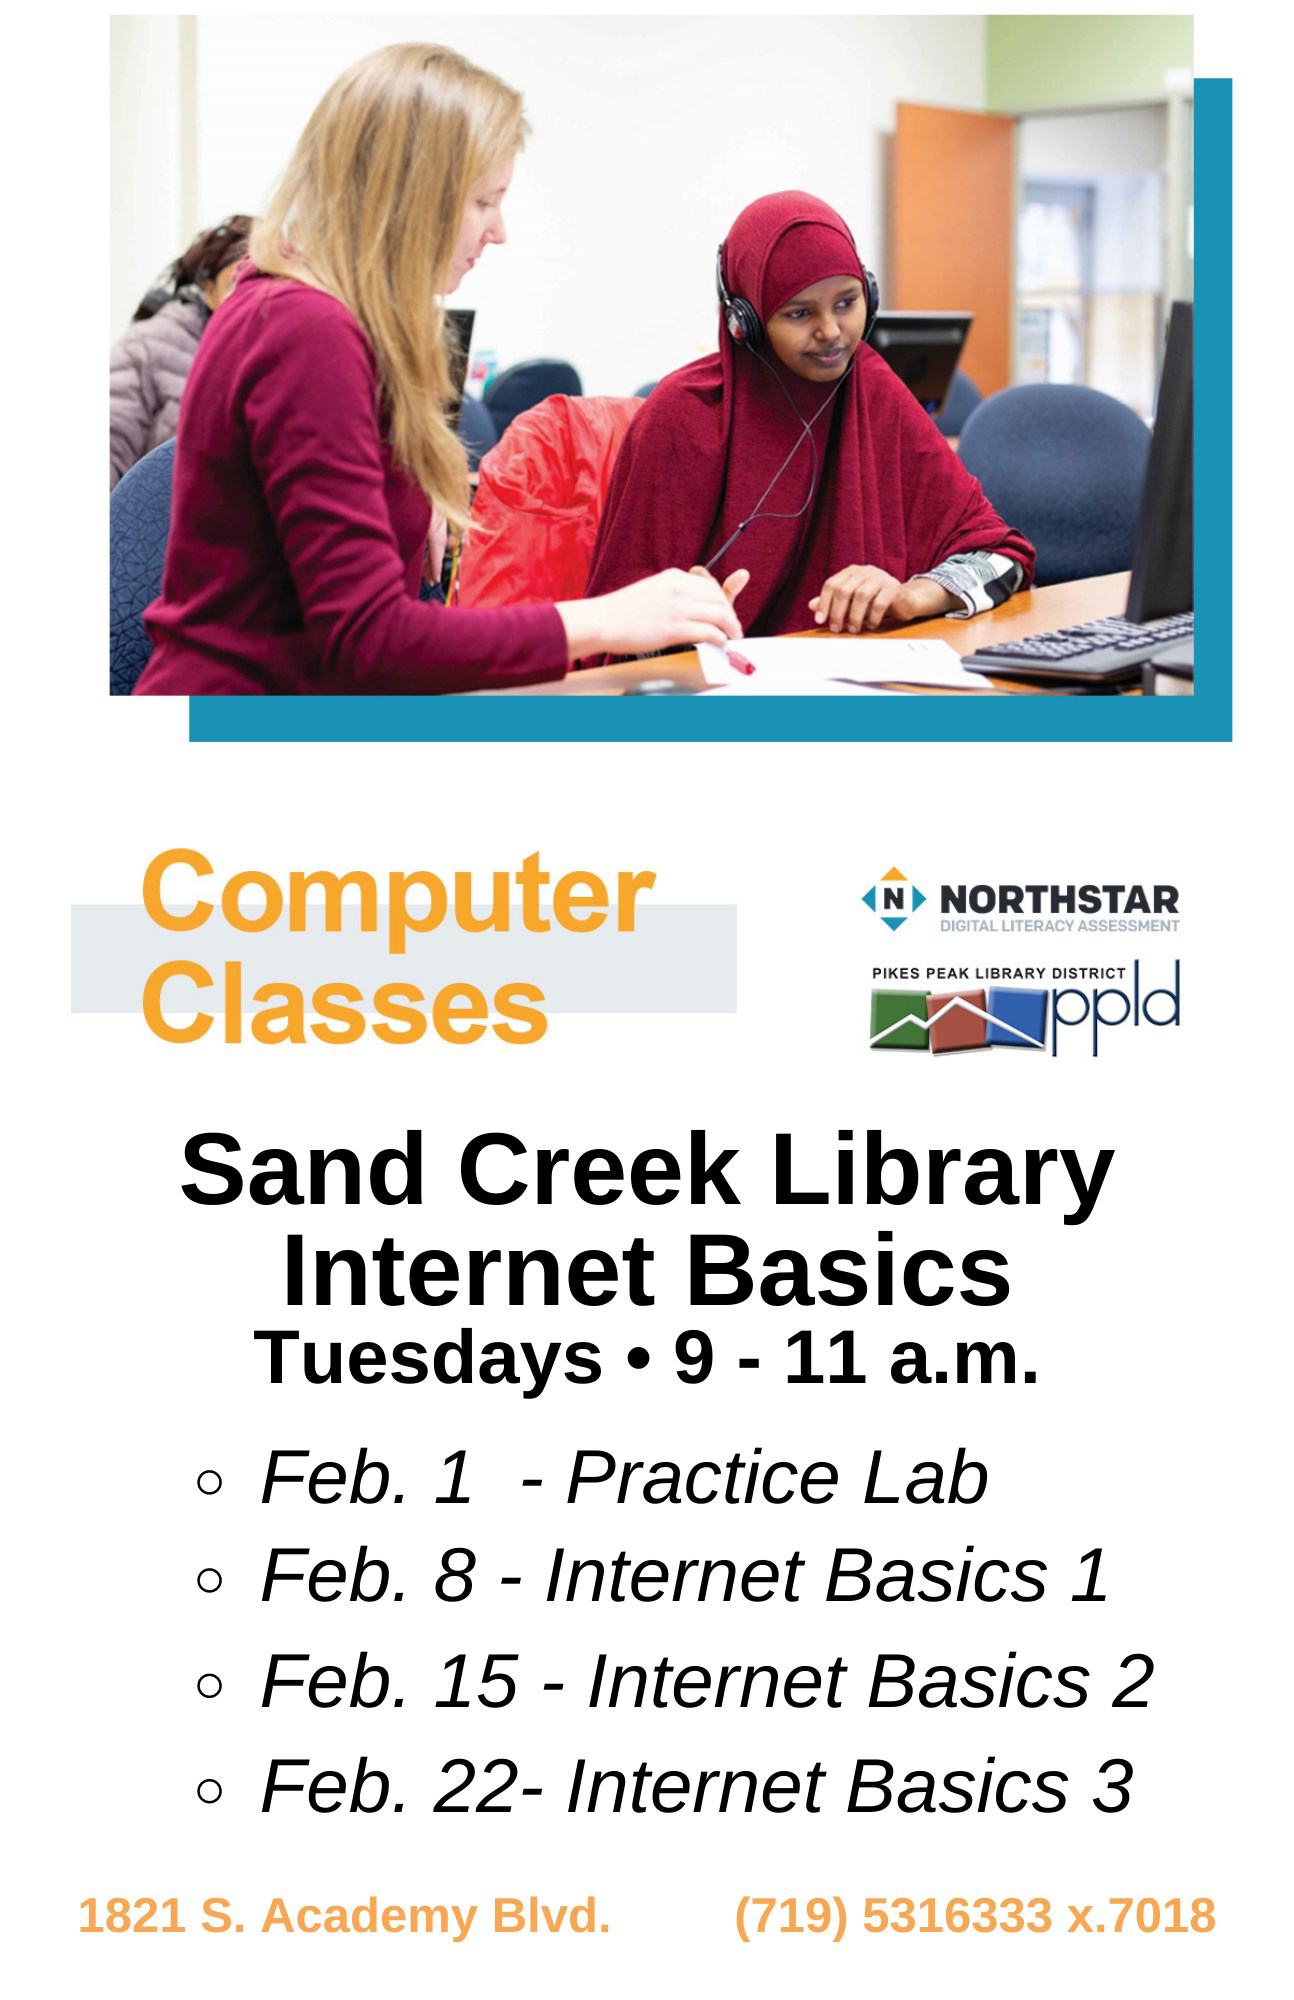 List of computer classes for February.